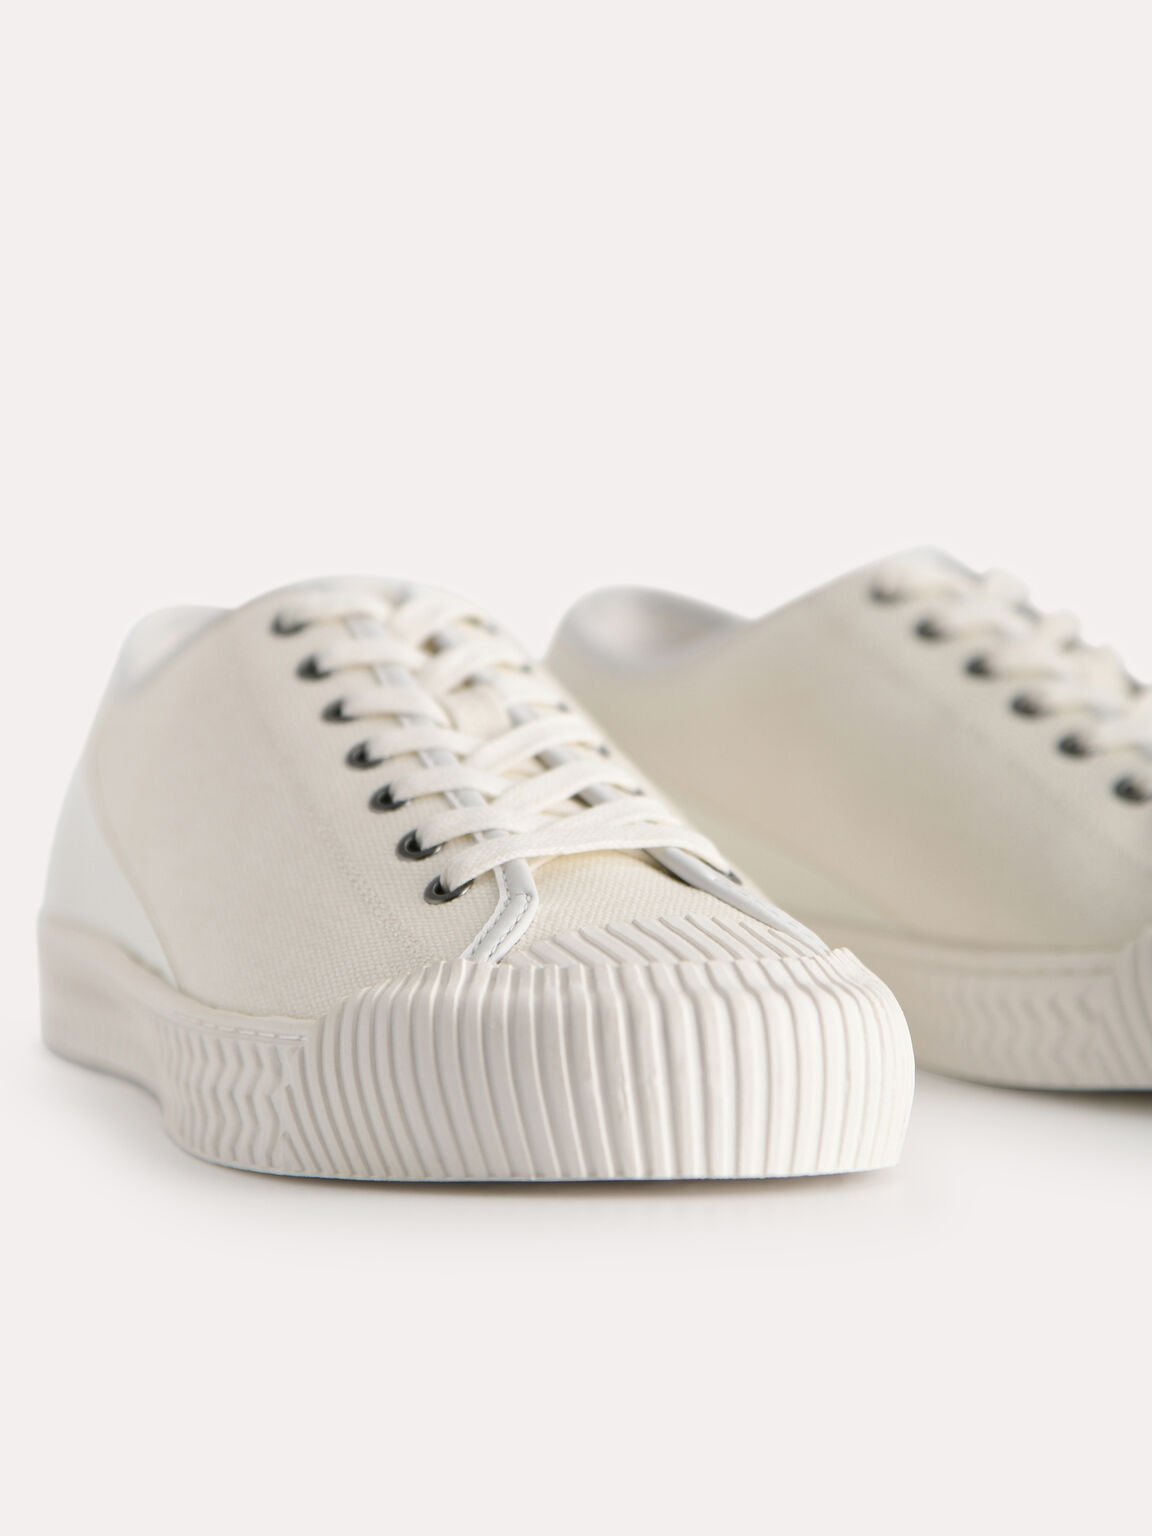 rePEDRO Lace-up Sneaker, Chalk